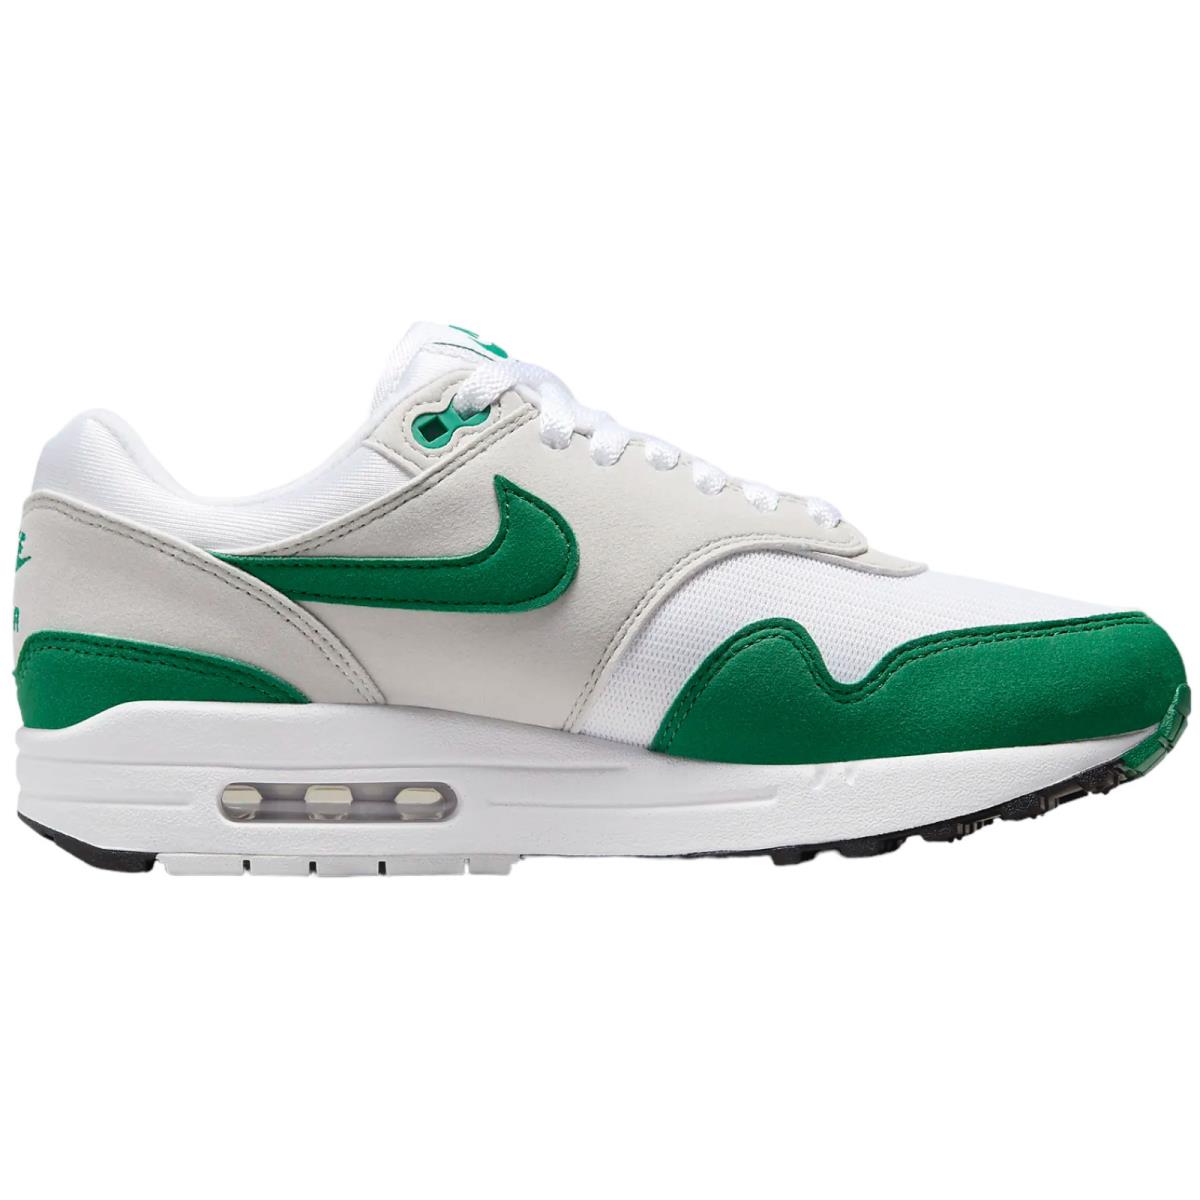 Nike Air Max 1 Women`s Casual Shoes All Colors US Sizes 6-11 Neutral Grey/White/Black/Malachite